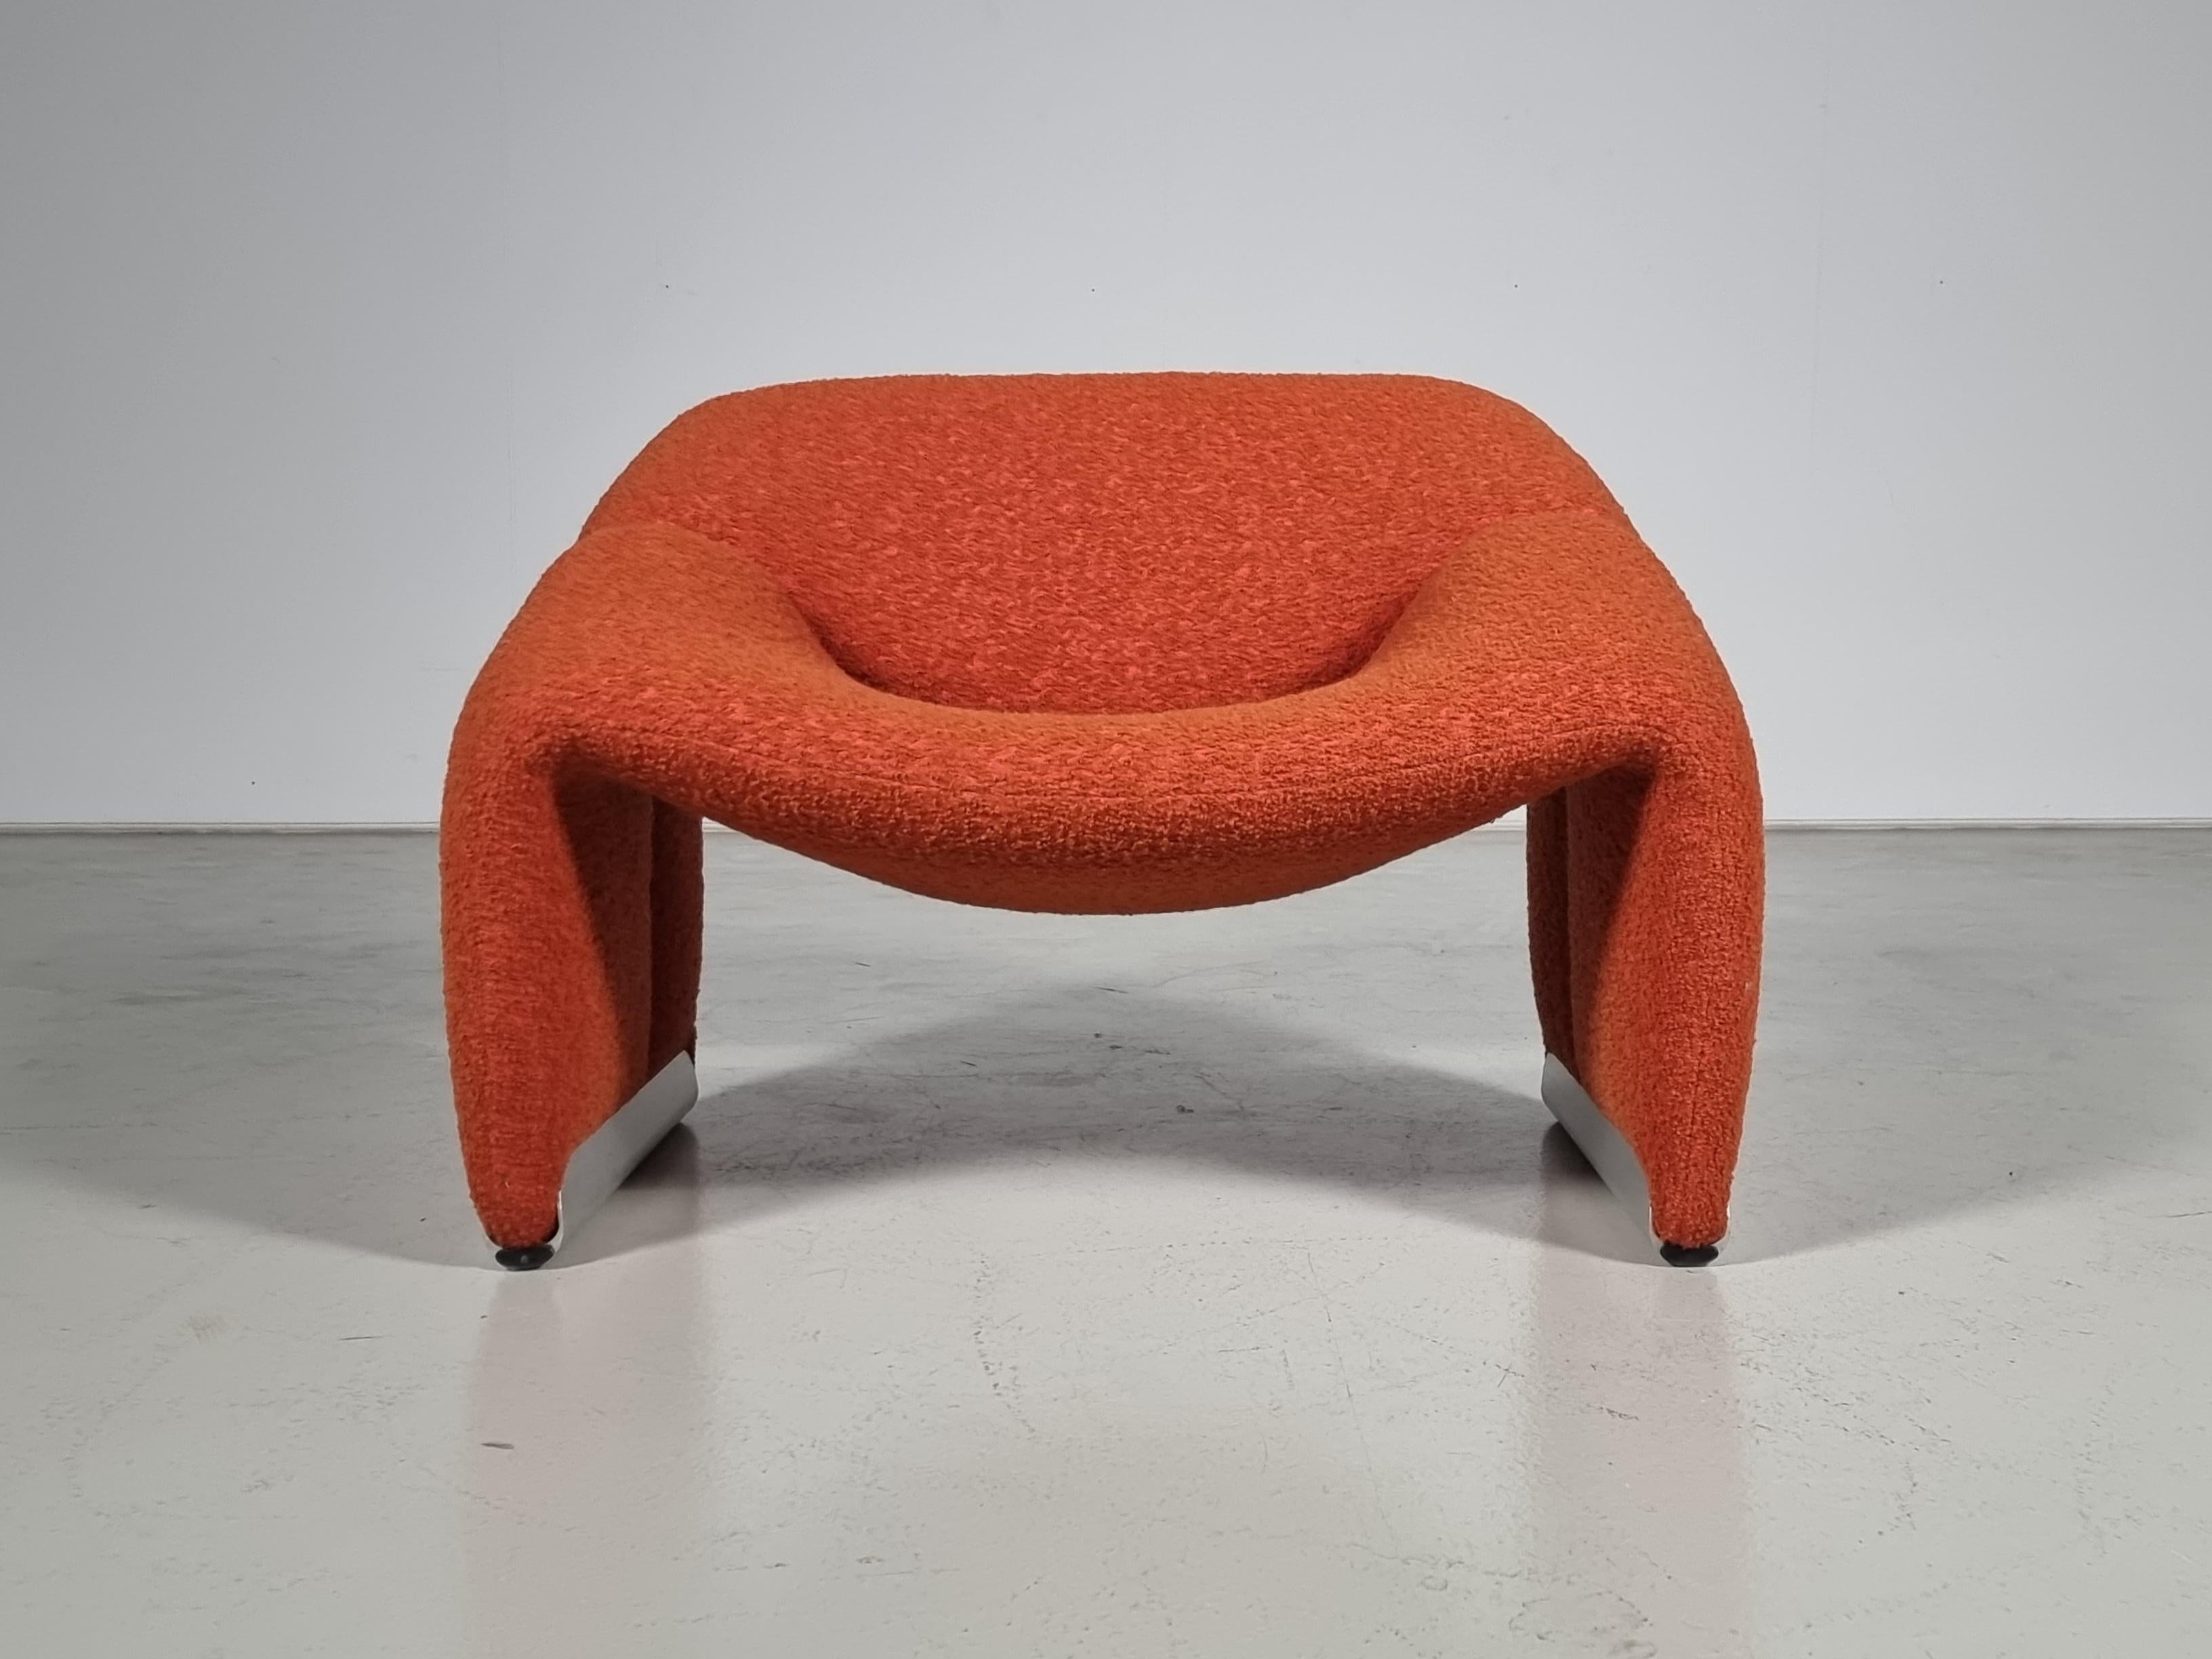 The Groovy chair, or F598, was designed in 1973 by France’s top designer Pierre Paulin for Holland’s most Avant-Garde furniture maker Artifort. Their compactness combined with great comfort and of course, iconic looks made this chair one of the